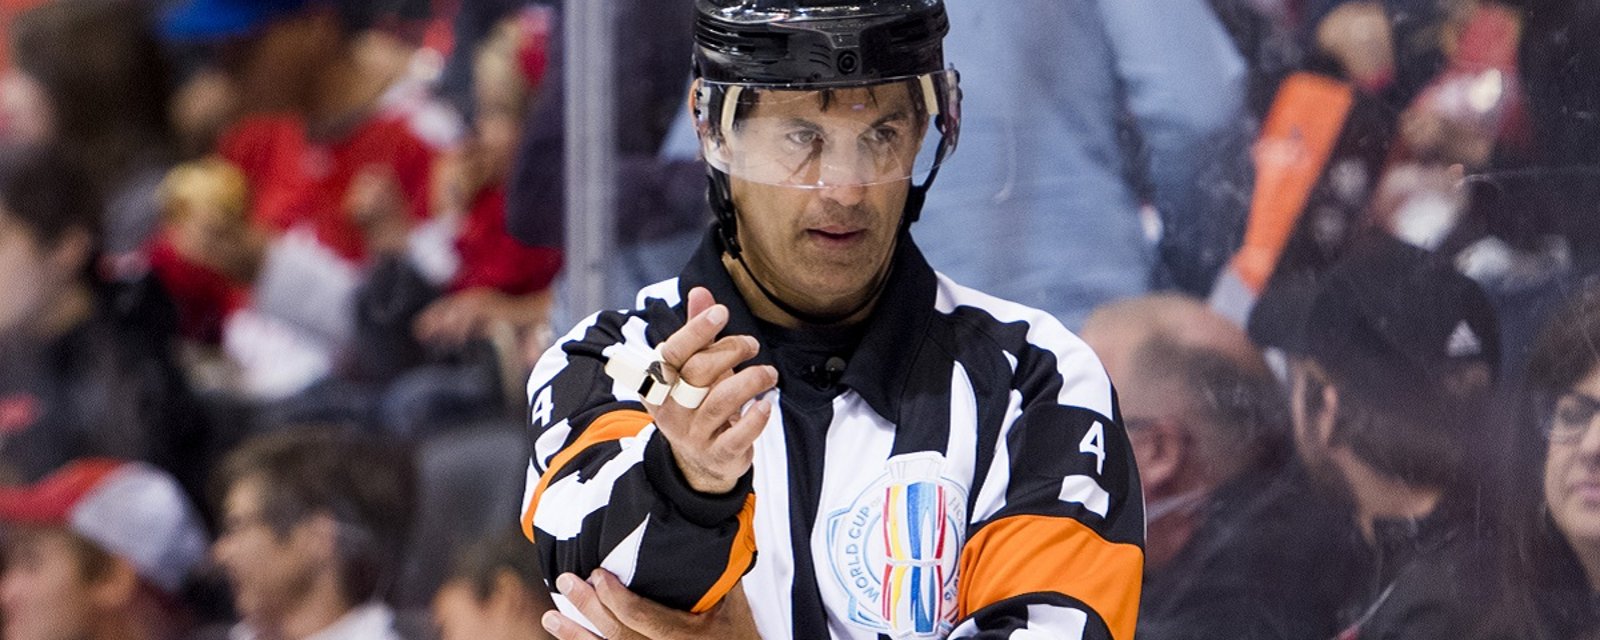 Referee Wes McCauley has another hilarious conversation caught on camera!